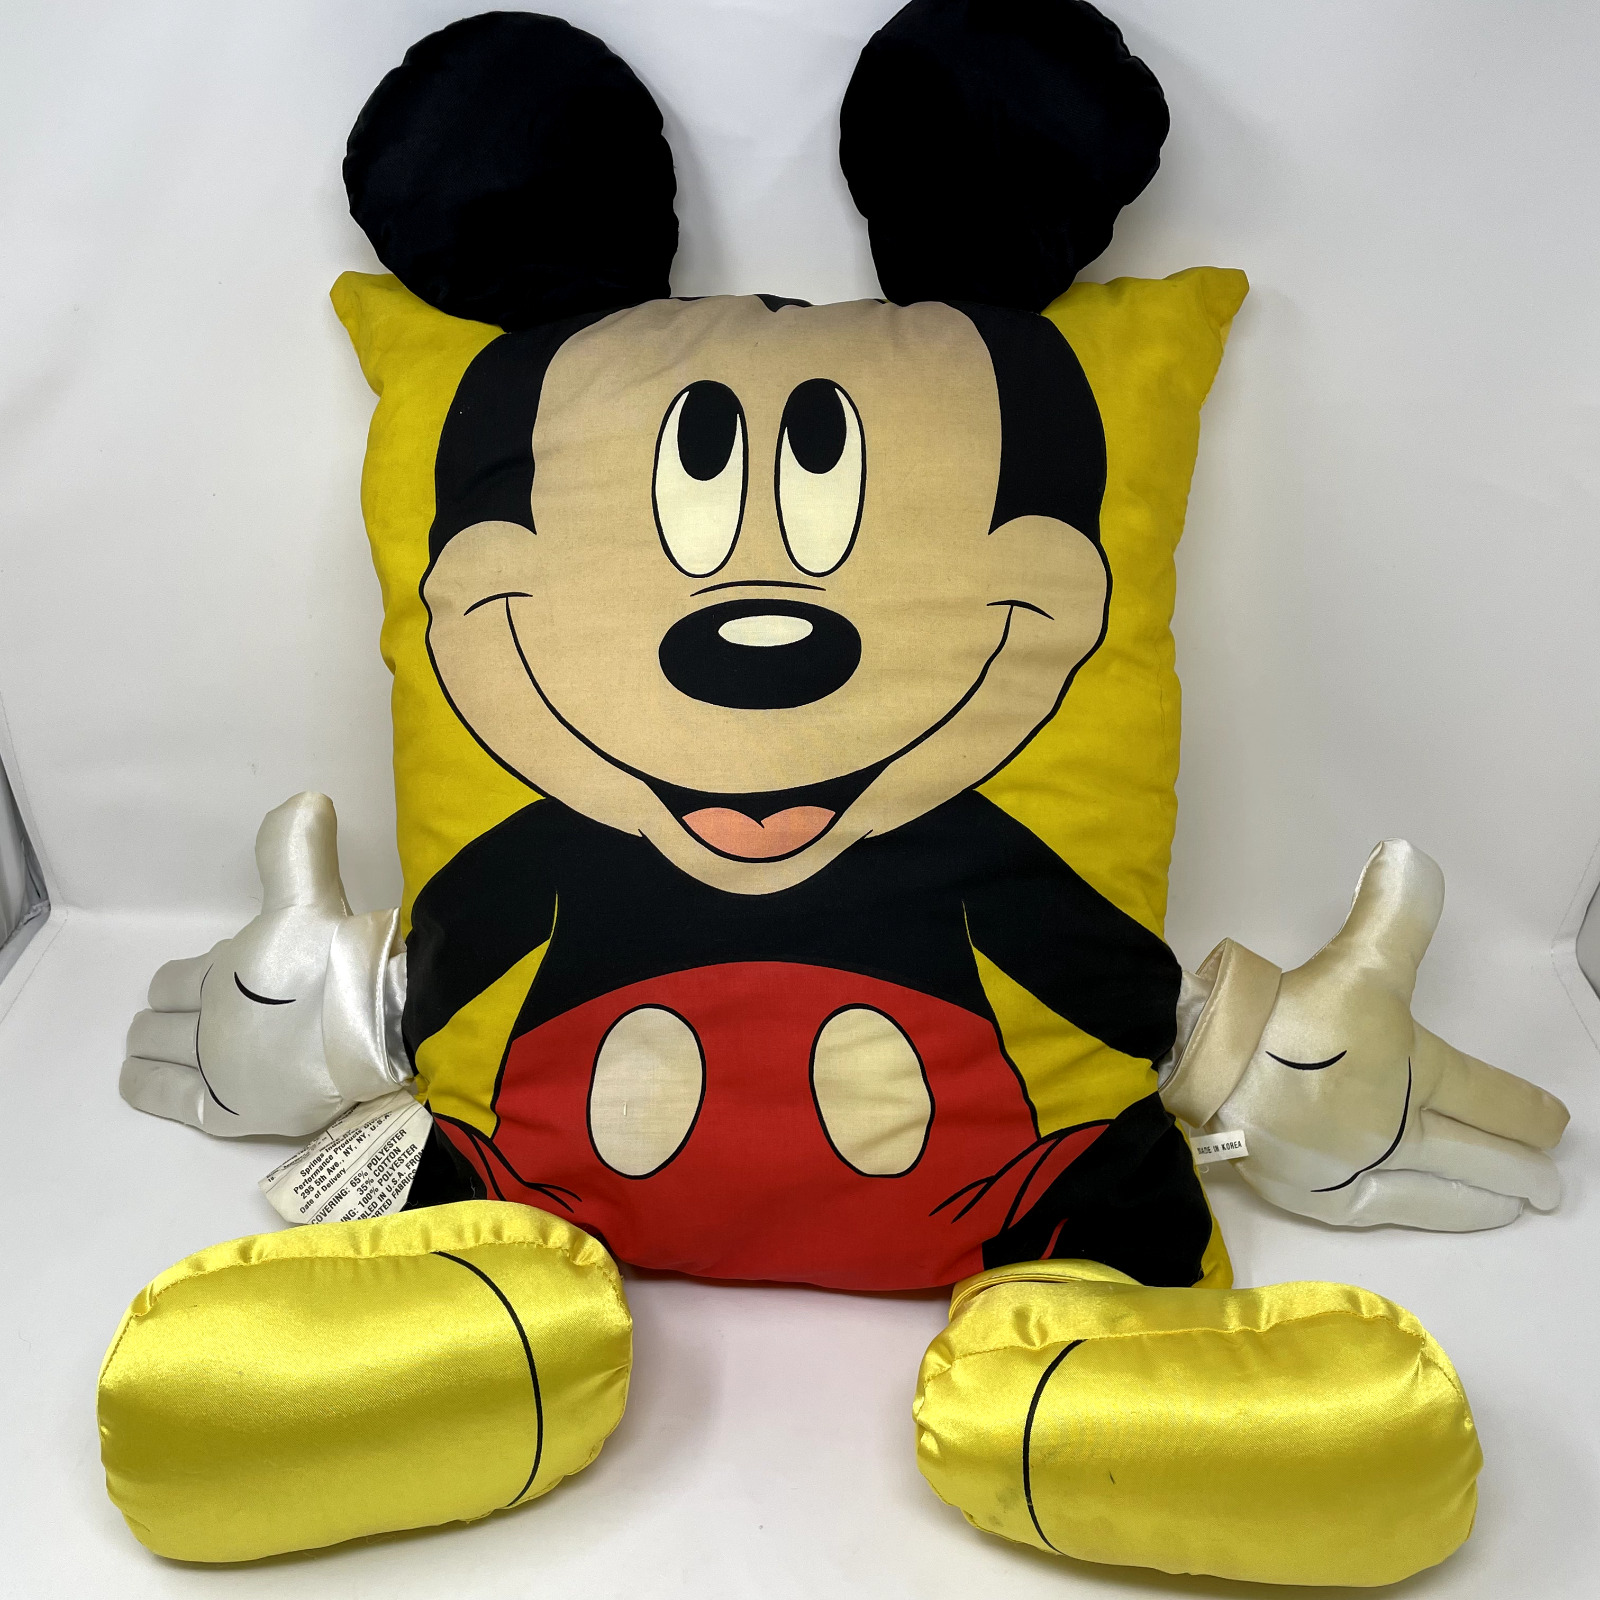 Vintage 1989 Mickey Mouse Mickey's Pillow Friends Loveable Snuggable Pillow